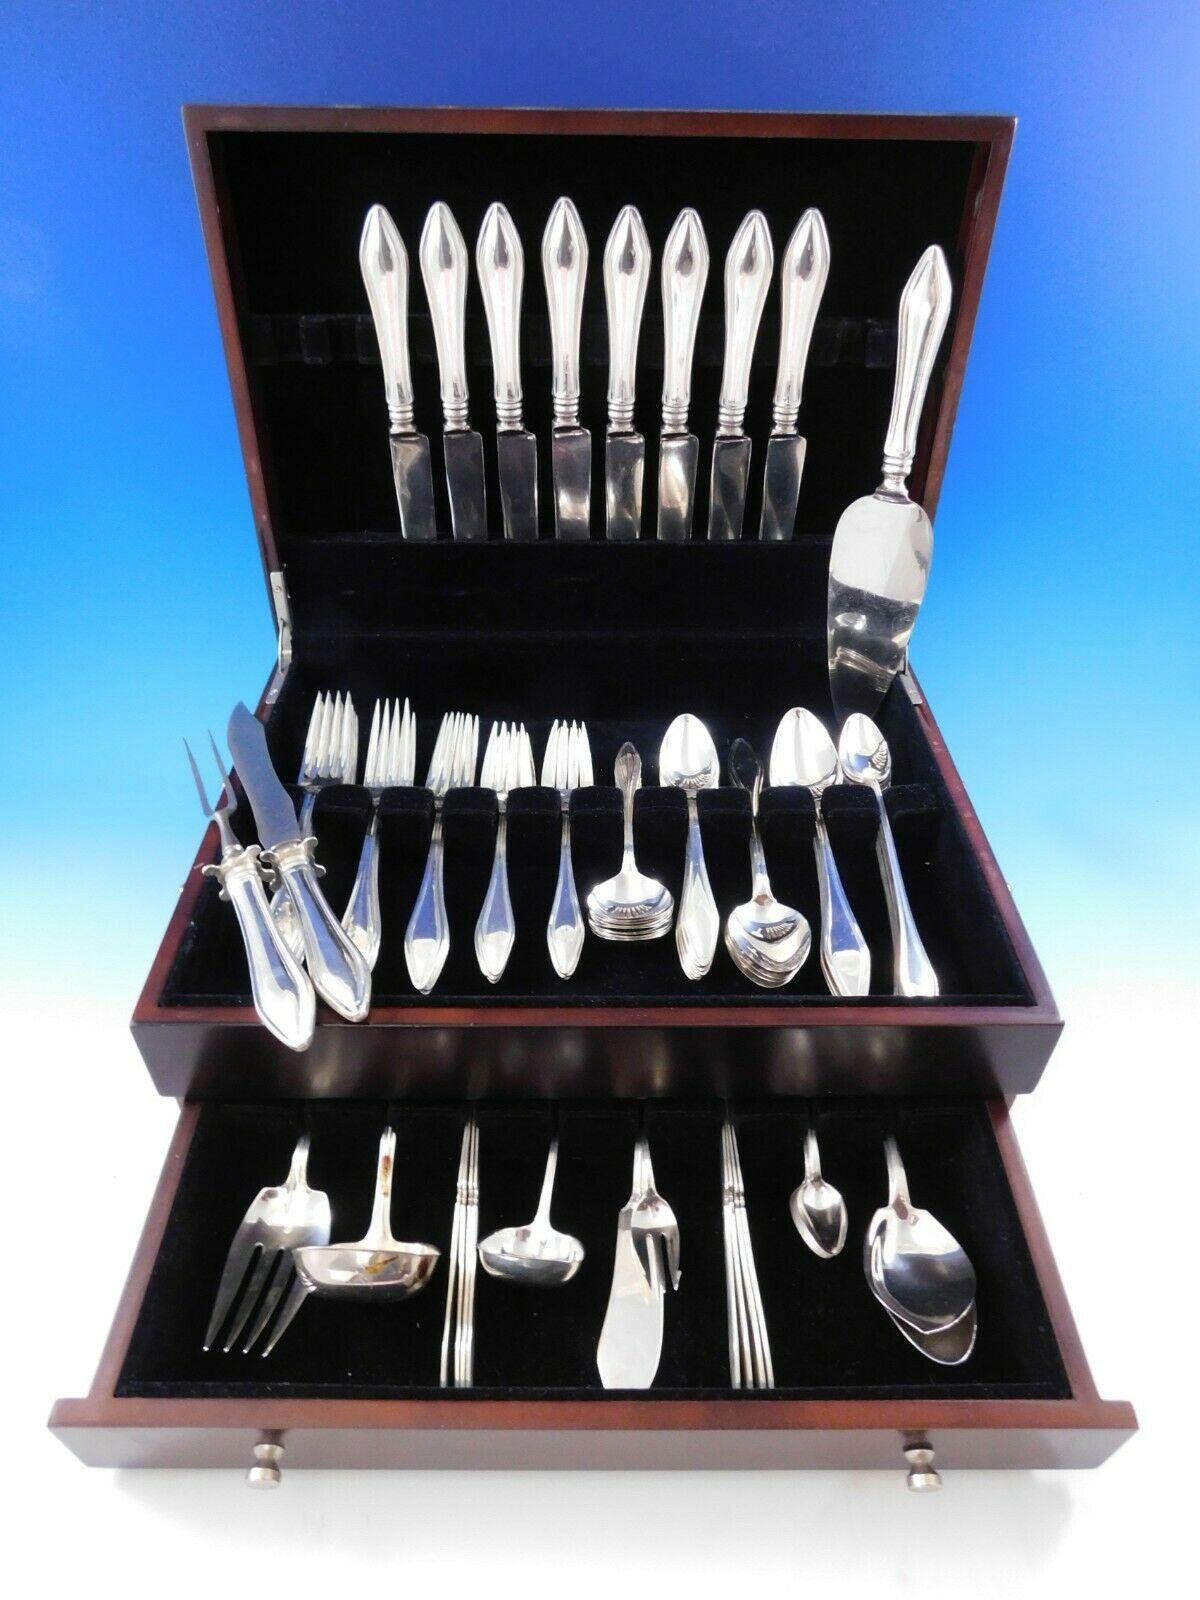 Timeless, heirloom quality Mary Chilton by Towle sterling silver flatware set - 91 pieces. This set includes:

8 knives, 9